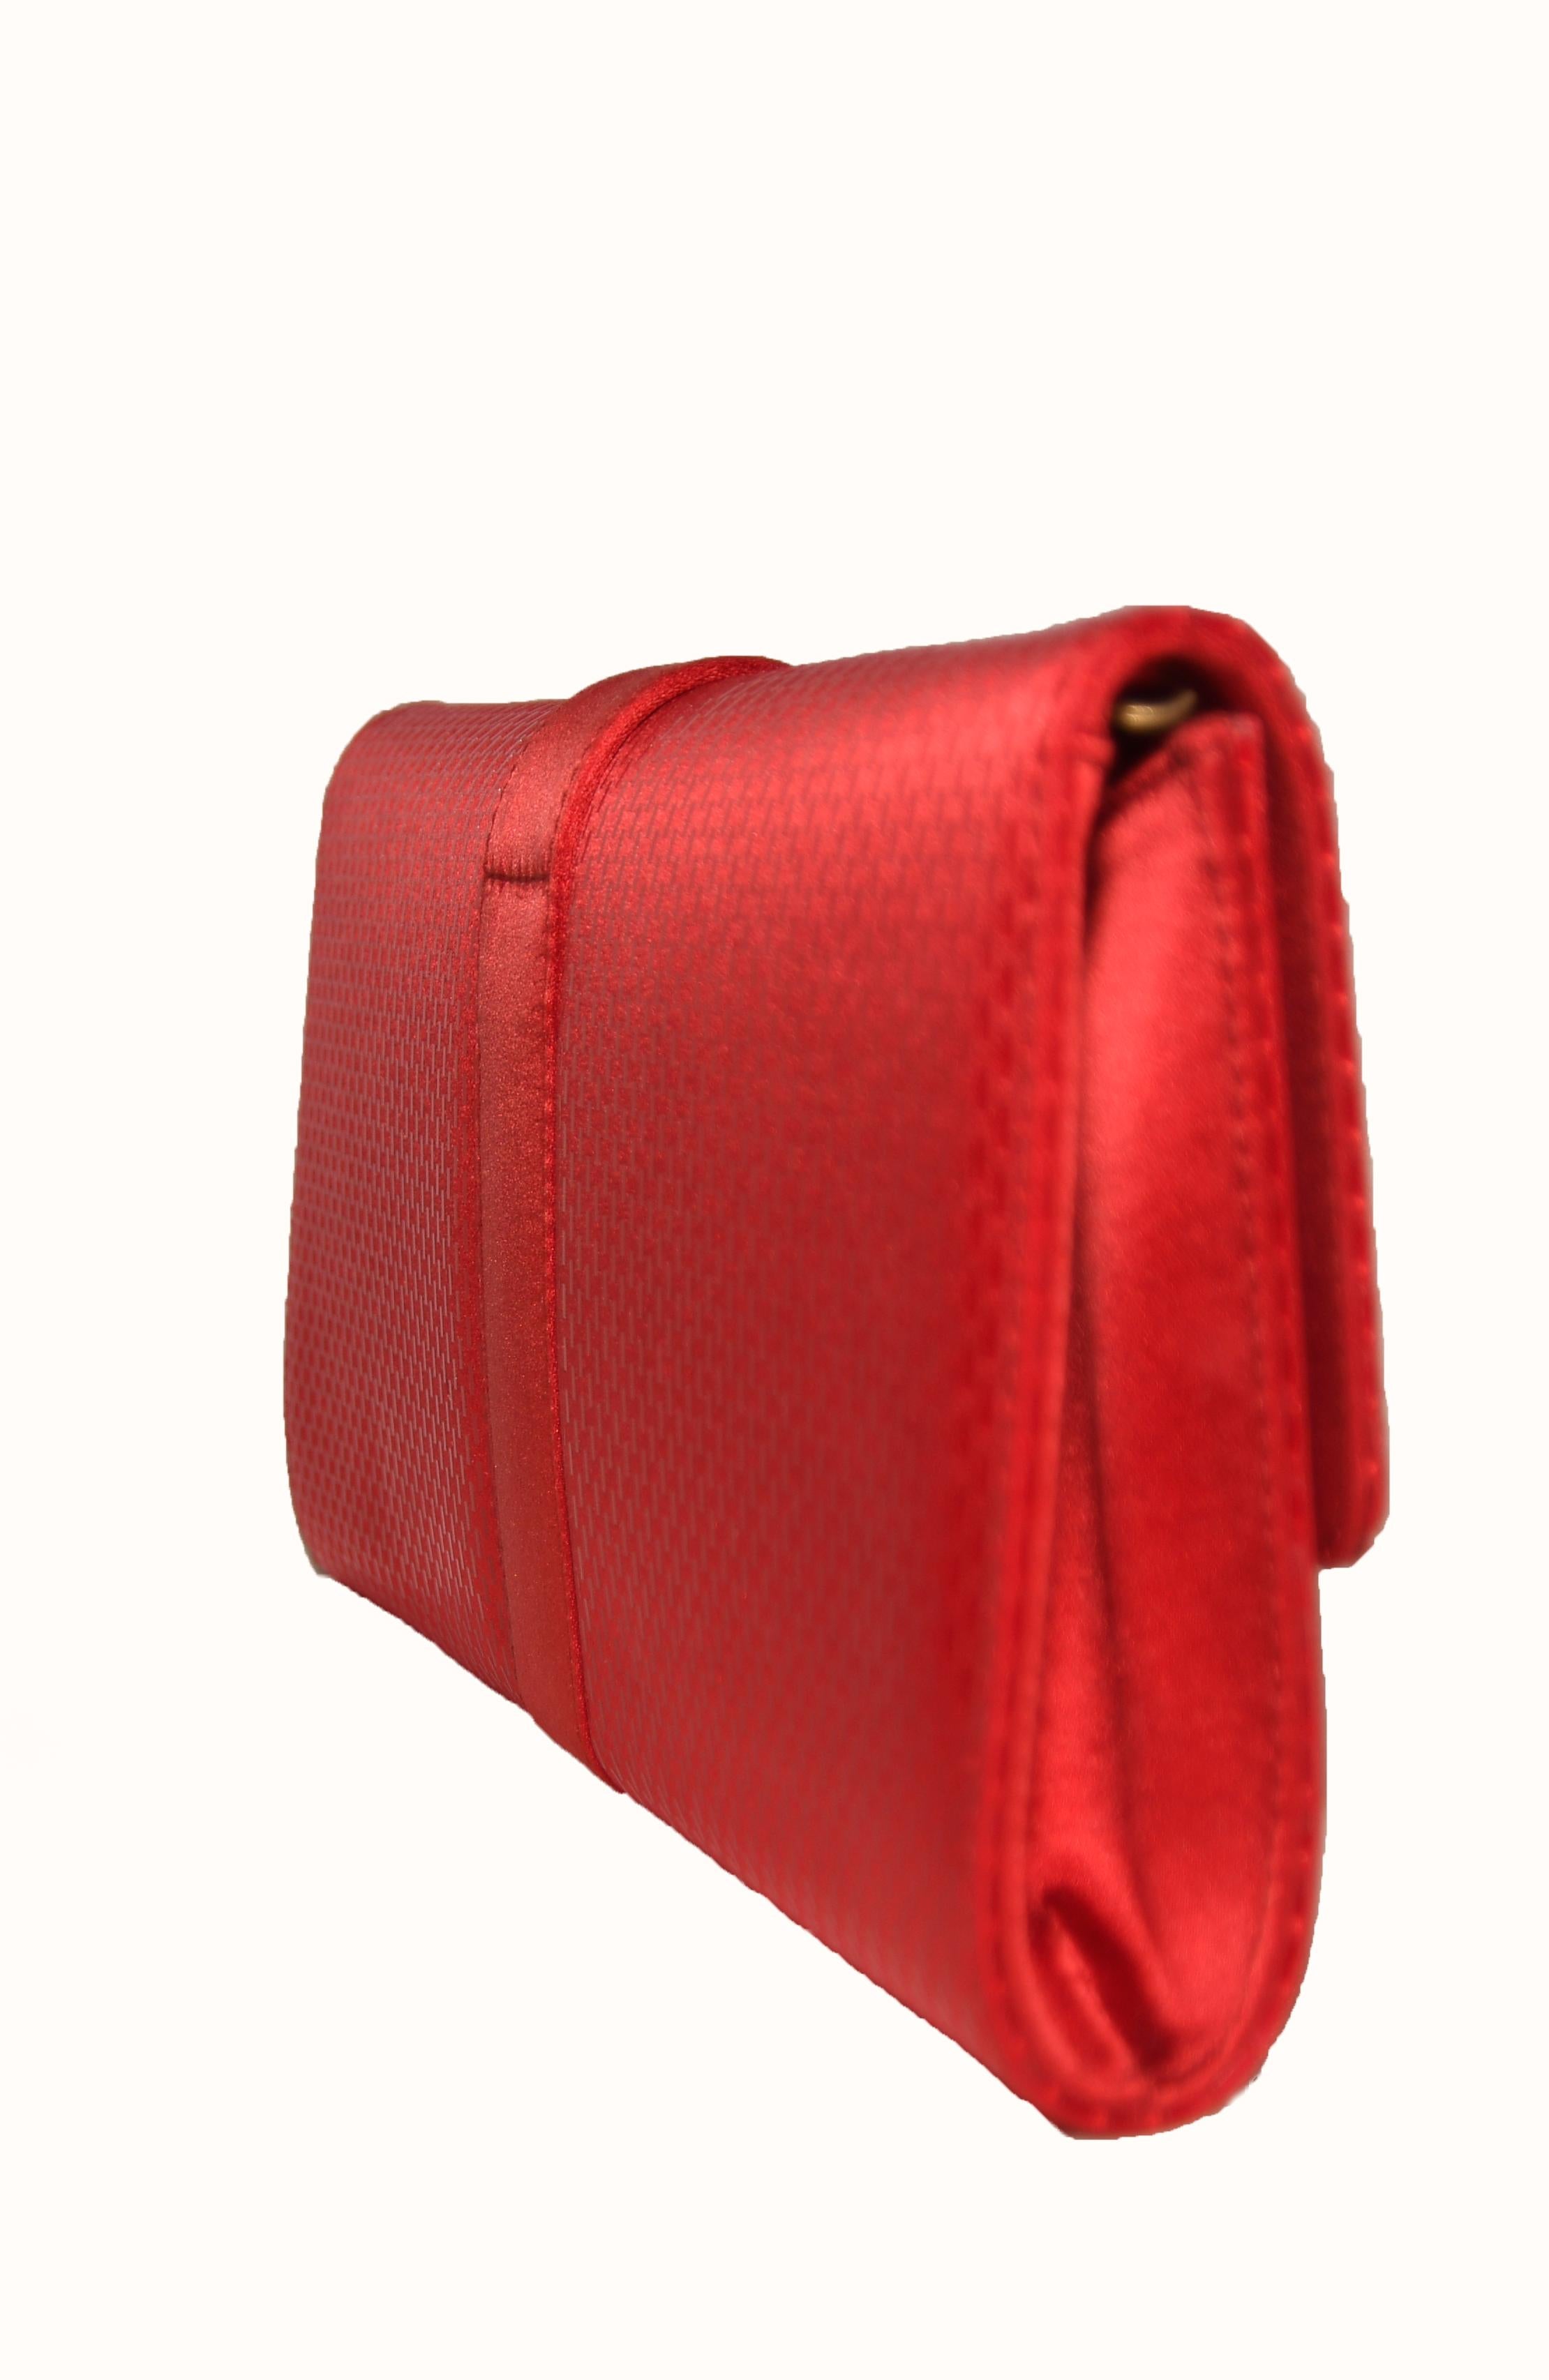 St. John red sequined clutch contains a removable gold tone metal shoulder strap.  The interior pocket is lined in red satin and includes a small side slit pocket with St. John gold tone plaque on the pocket.  For closure, a hidden magnetic snap